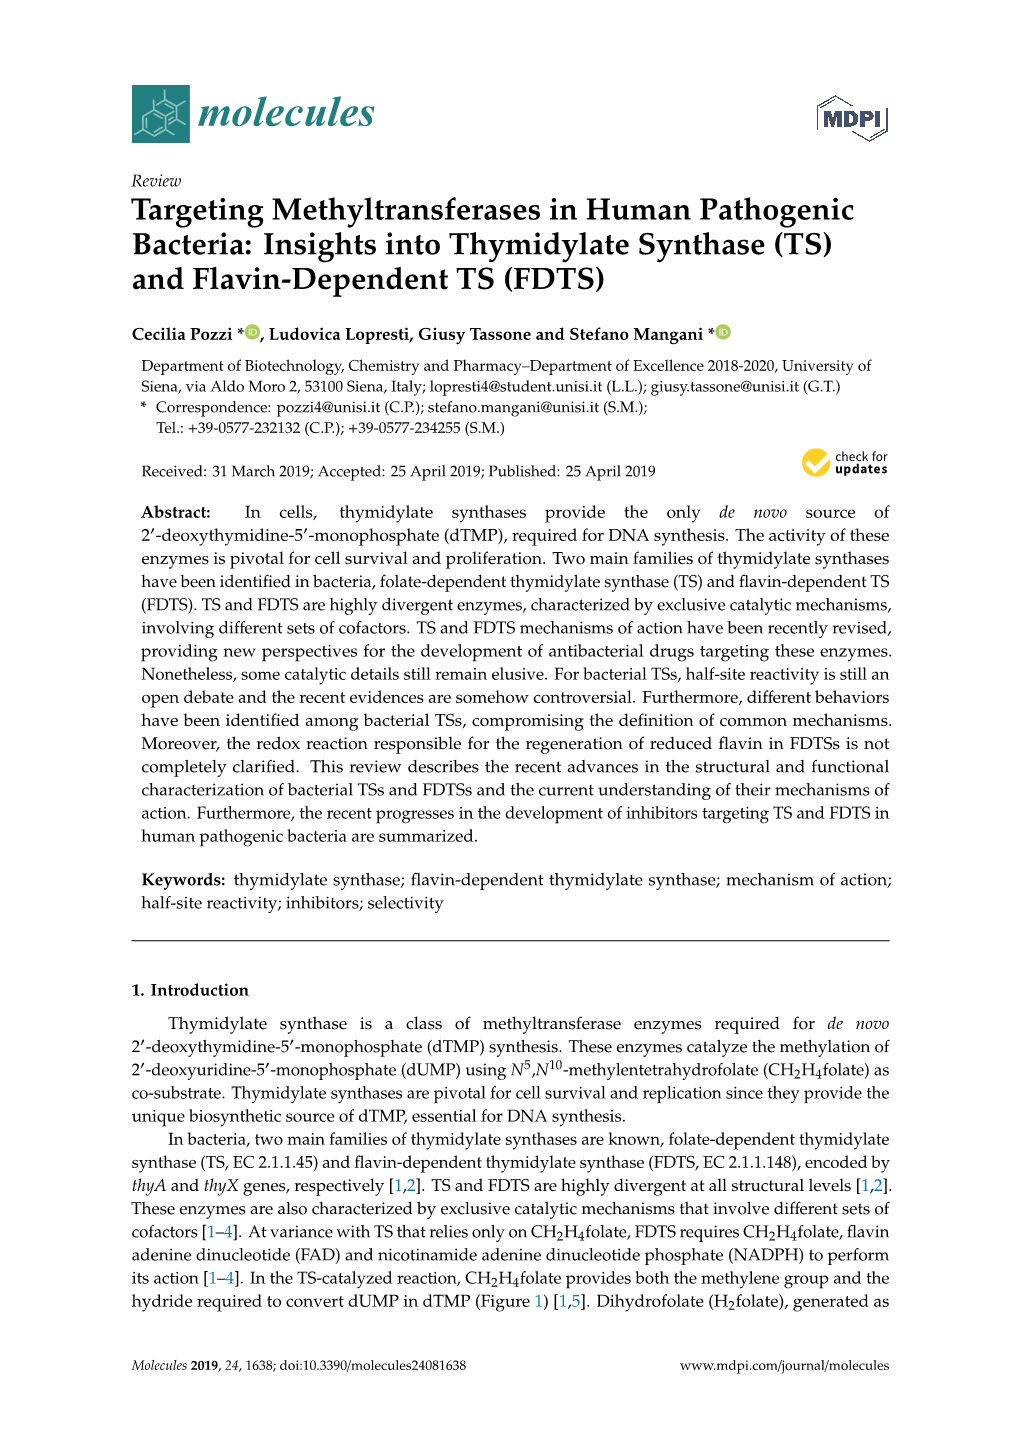 Insights Into Thymidylate Synthase (TS) and Flavin-Dependent TS (FDTS)